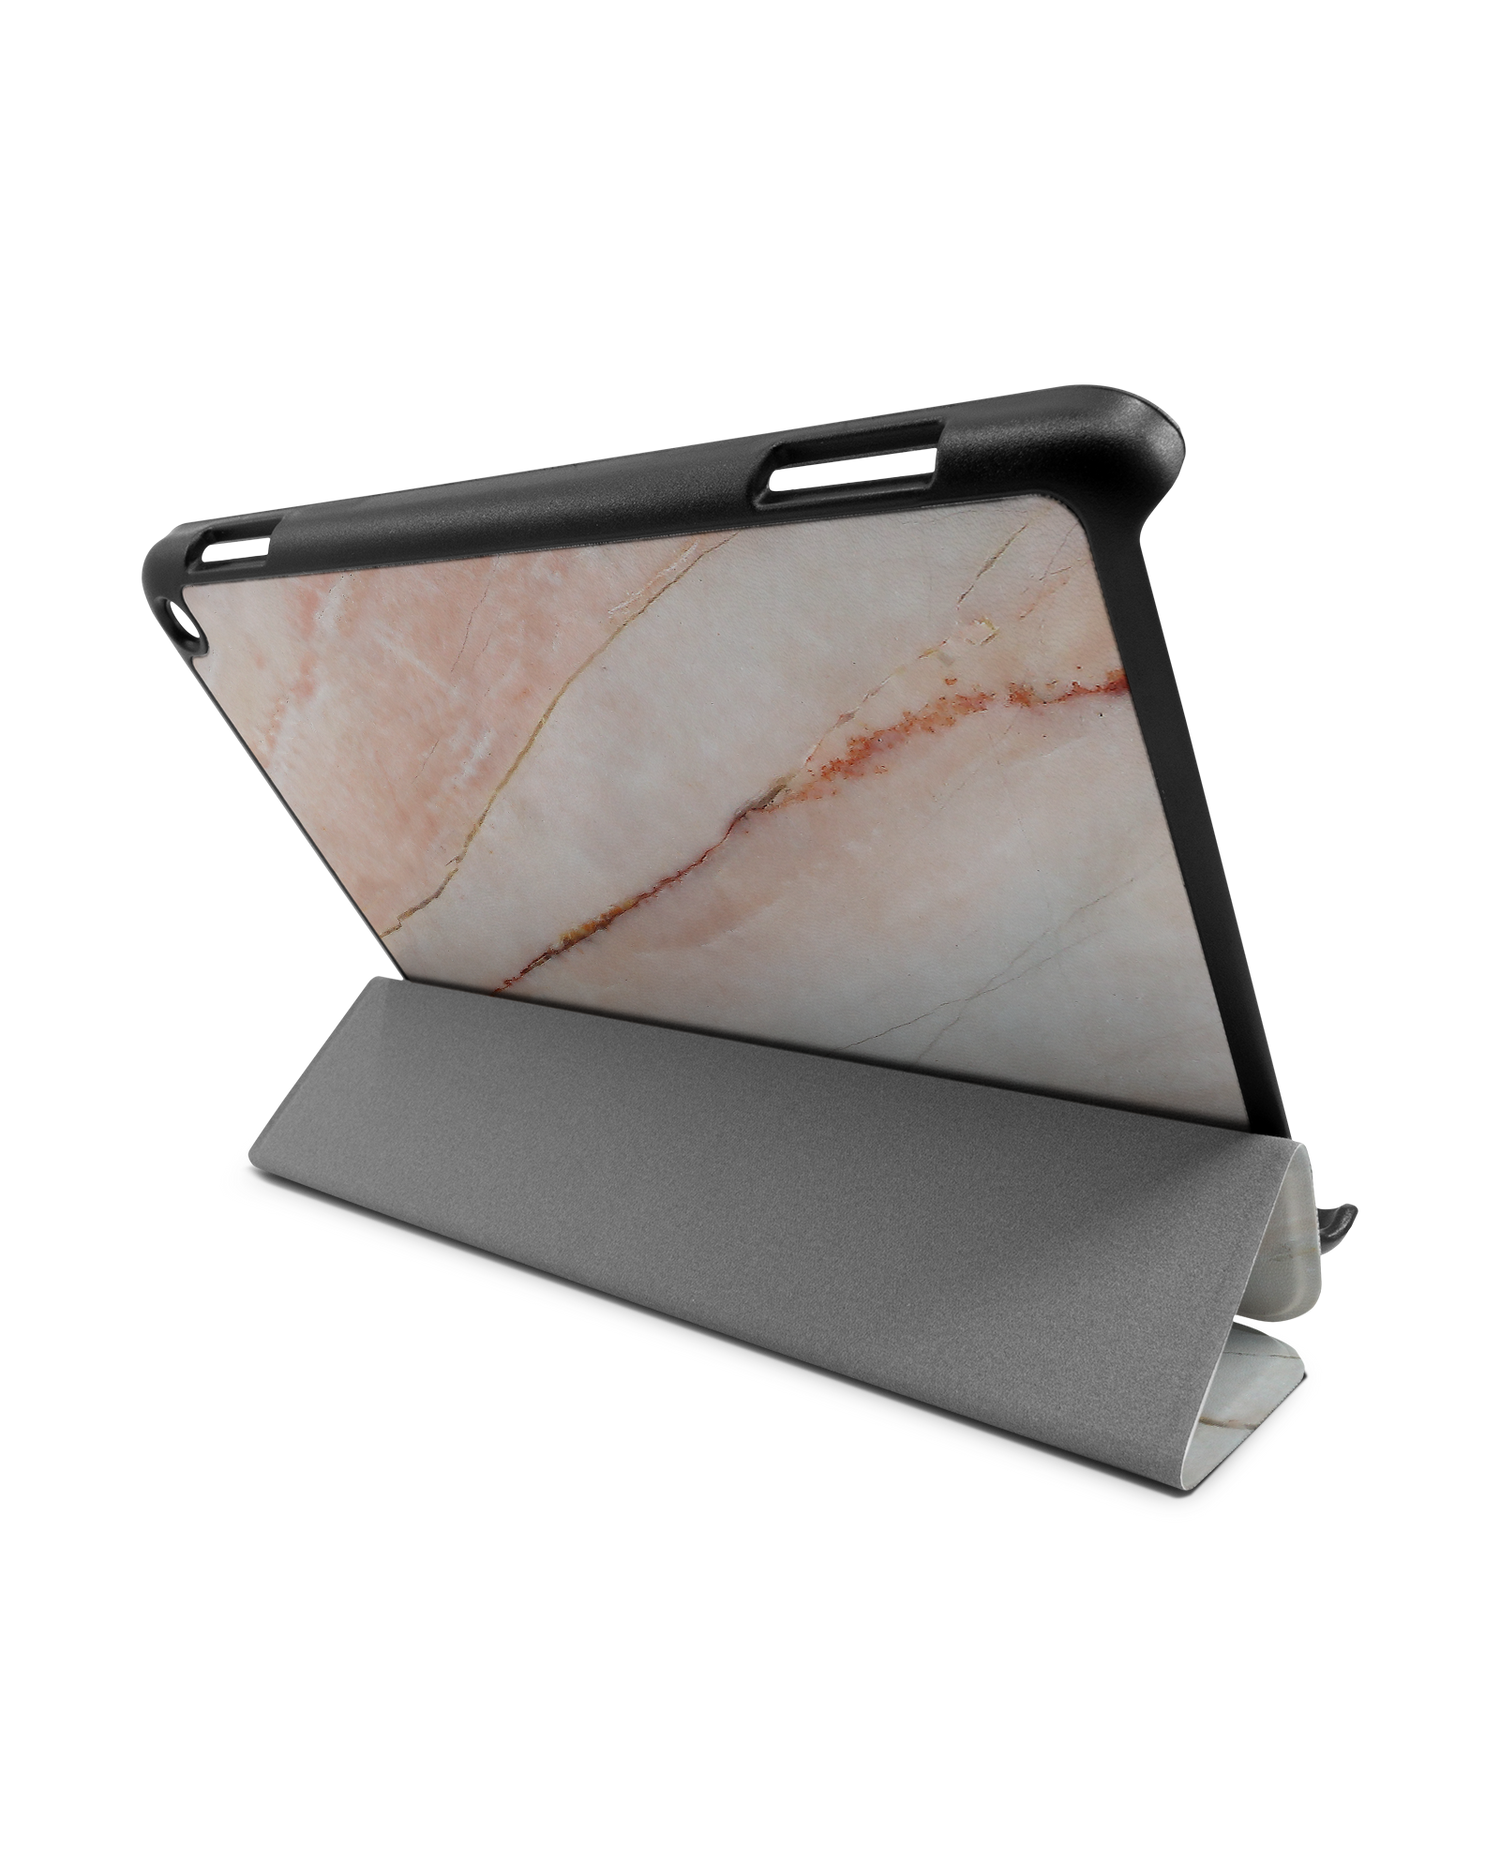 Mother of Pearl Marble Tablet Smart Case for Amazon Fire HD 8 (2022), Amazon Fire HD 8 Plus (2022), Amazon Fire HD 8 (2020), Amazon Fire HD 8 Plus (2020): Used as Stand